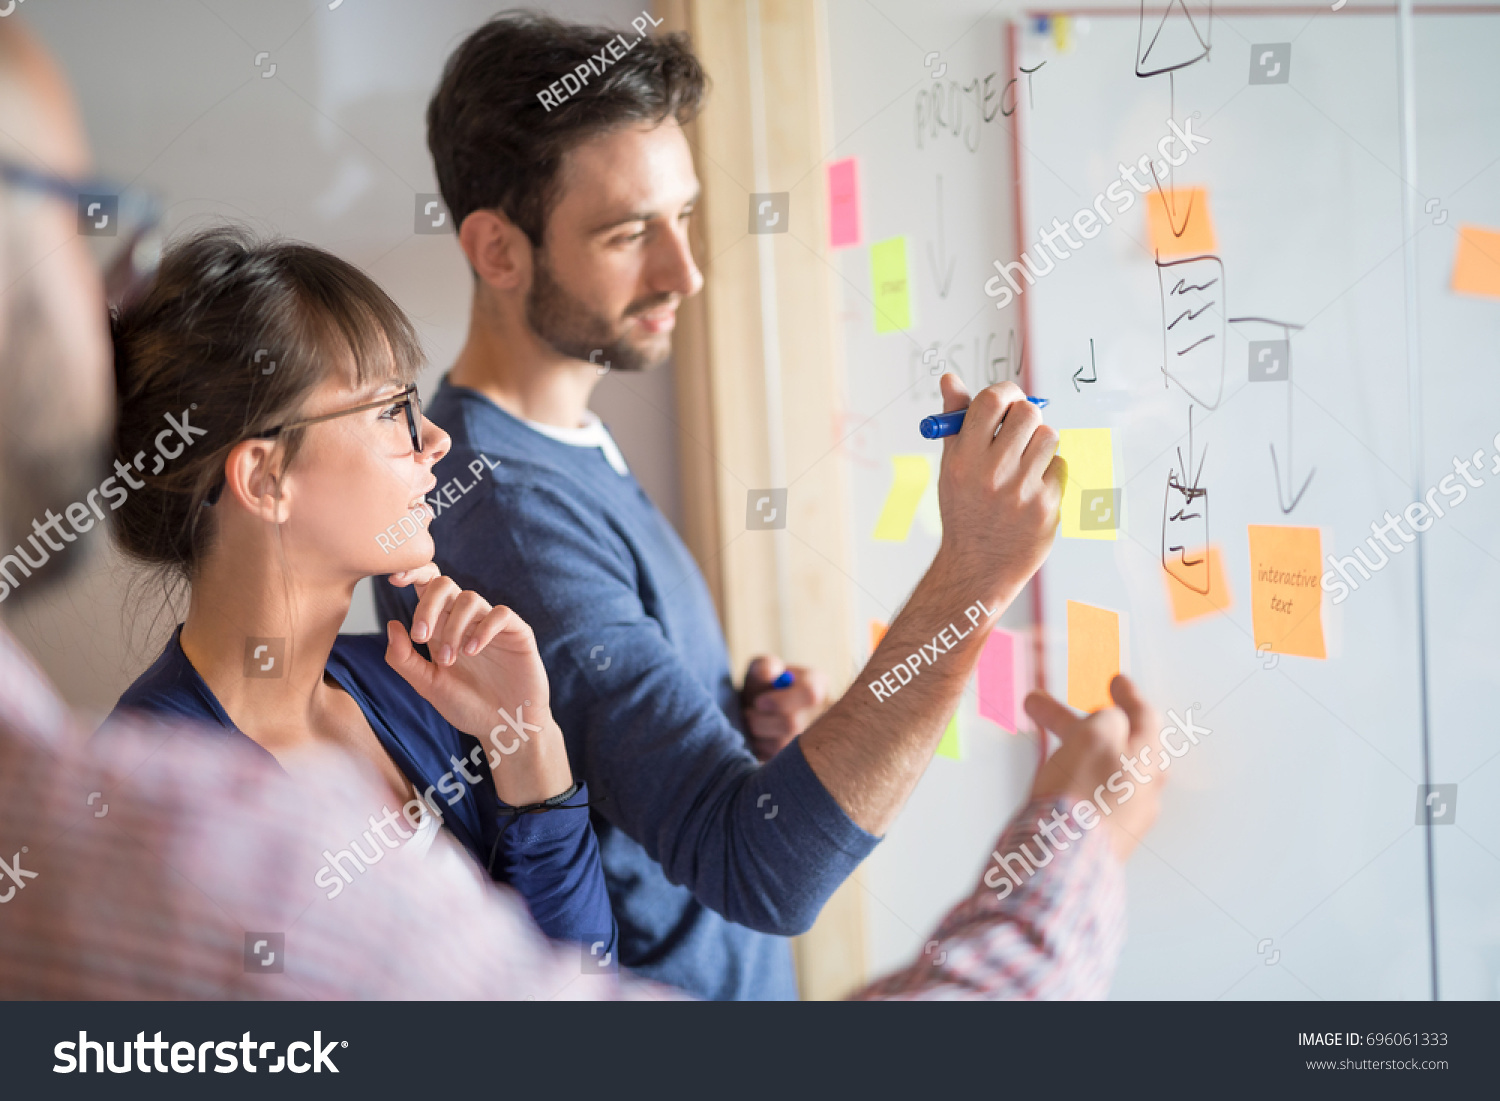 Business people meeting at office and use post it notes to share idea. Brainstorming concept. Sticky note on glass wall. #696061333